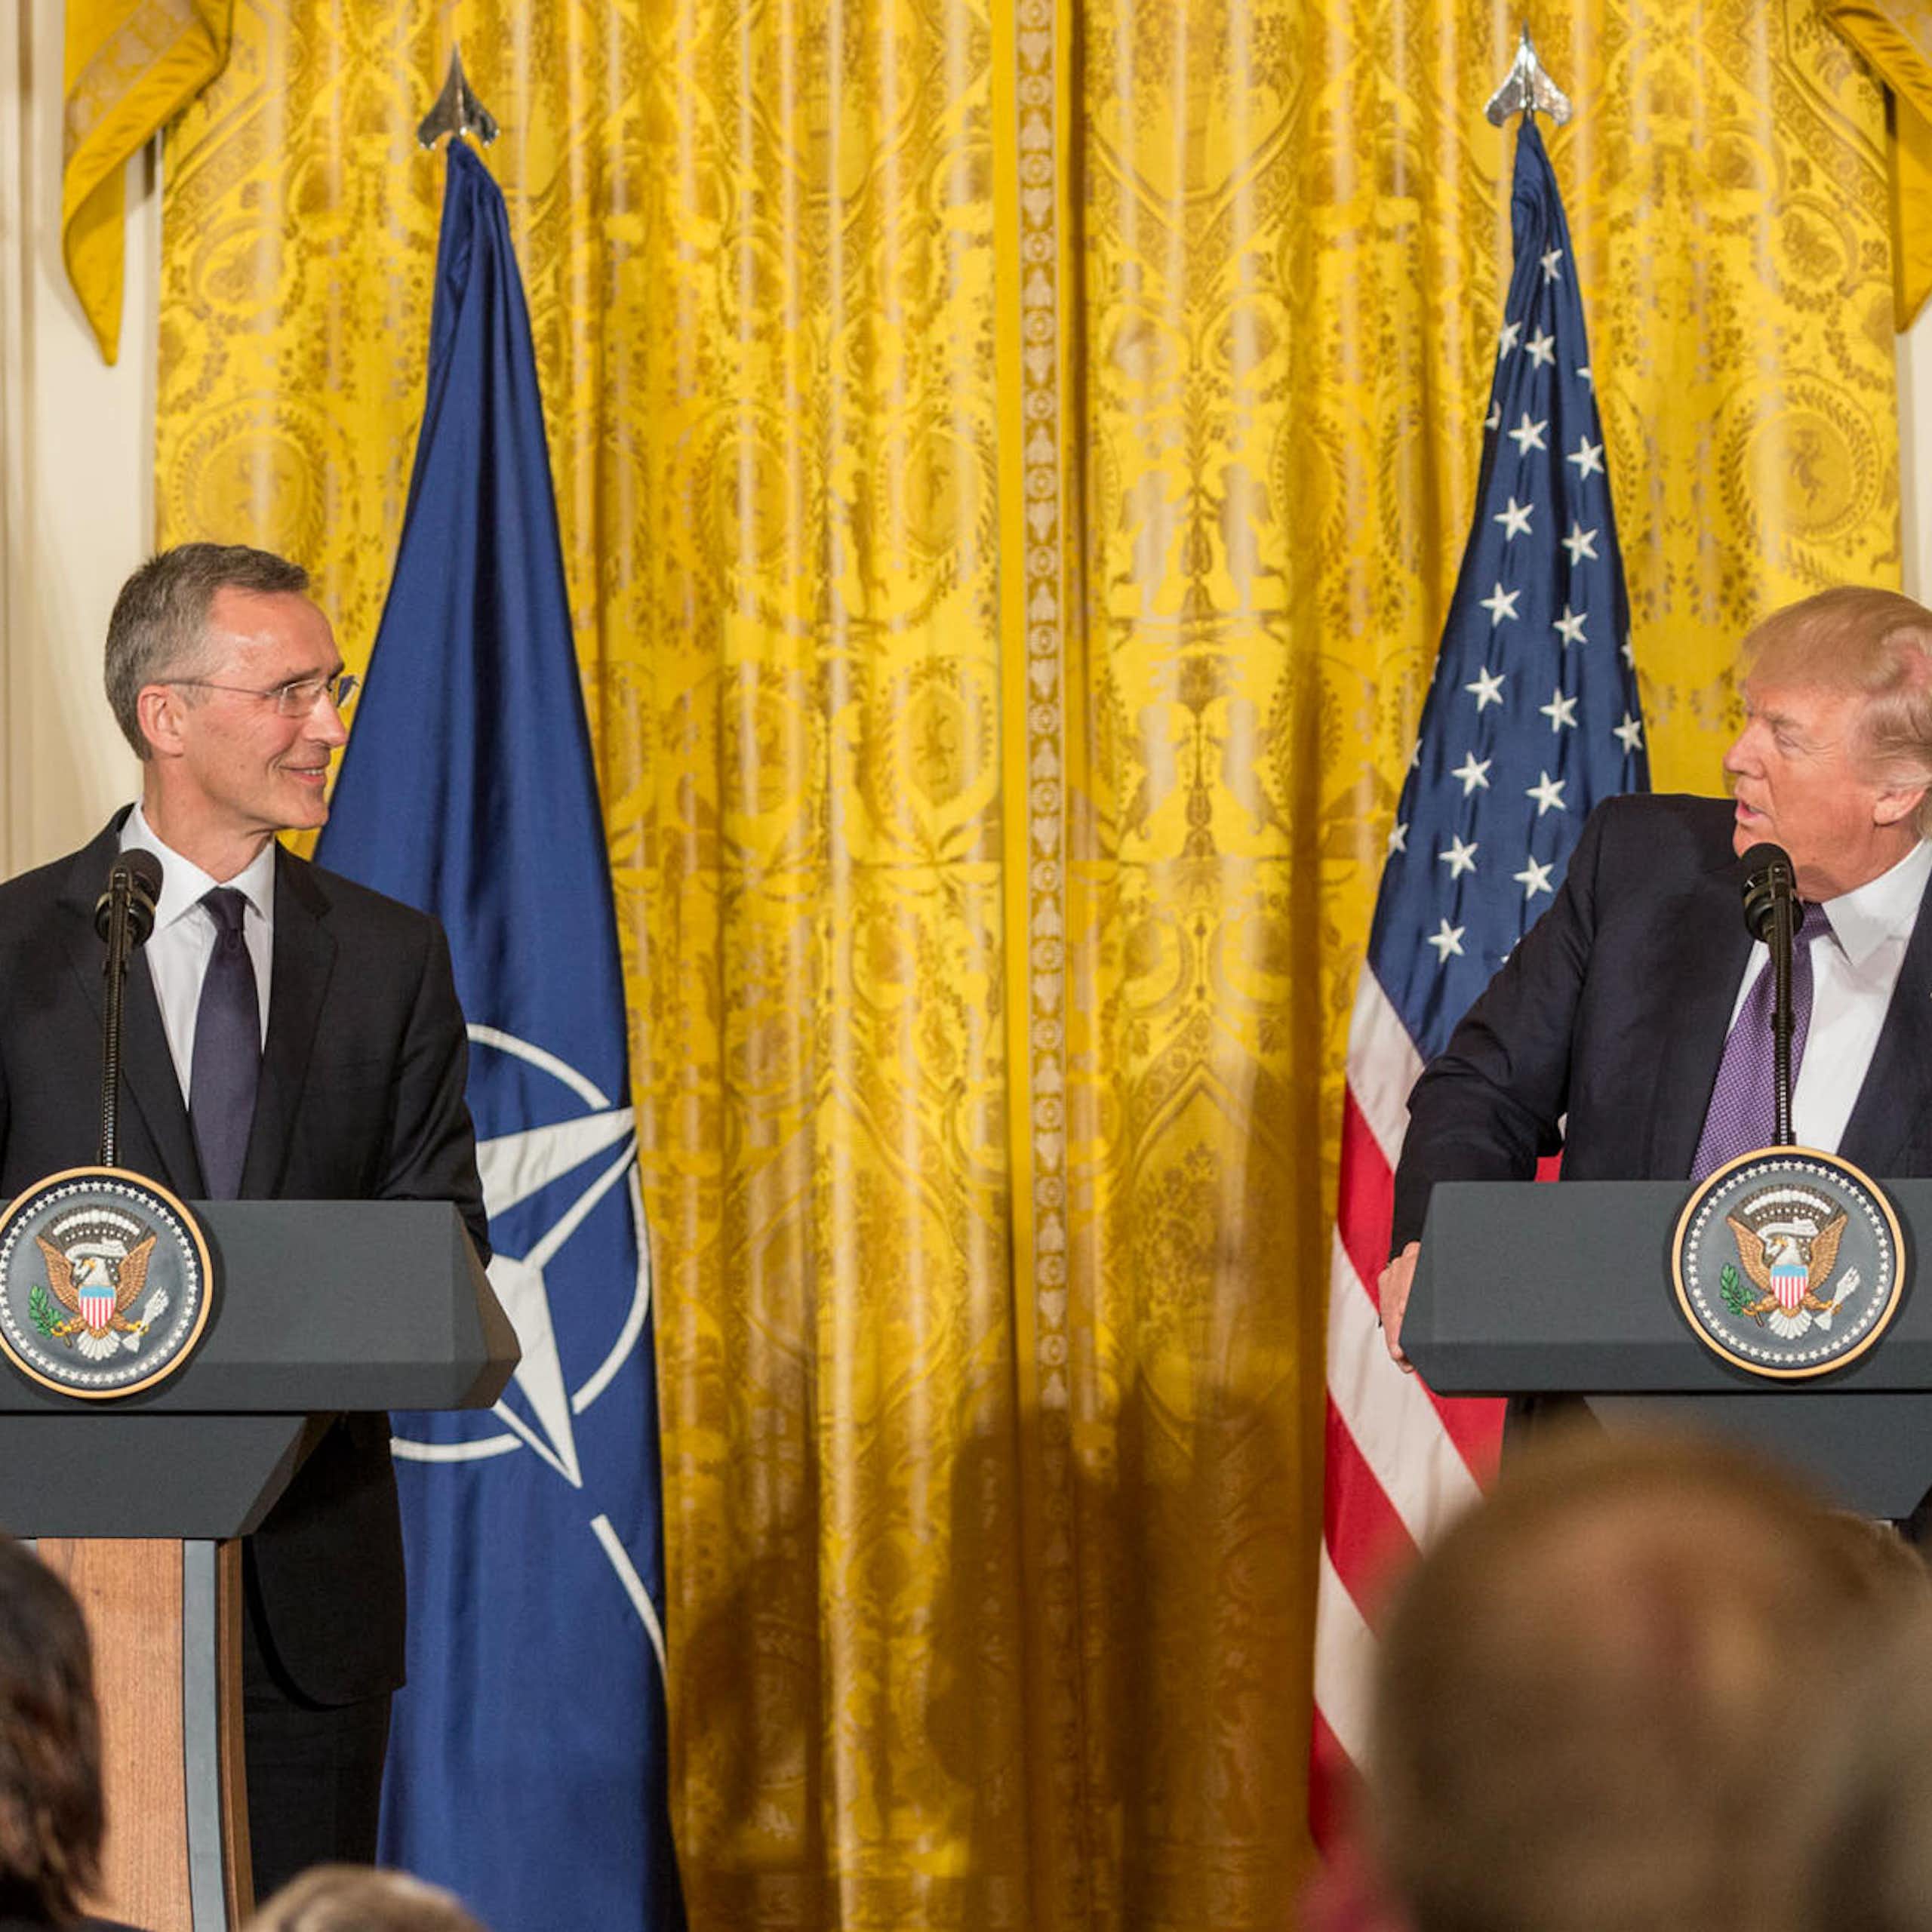 Donald Trump (right) and Jens Stolenberg standing in front of flags.